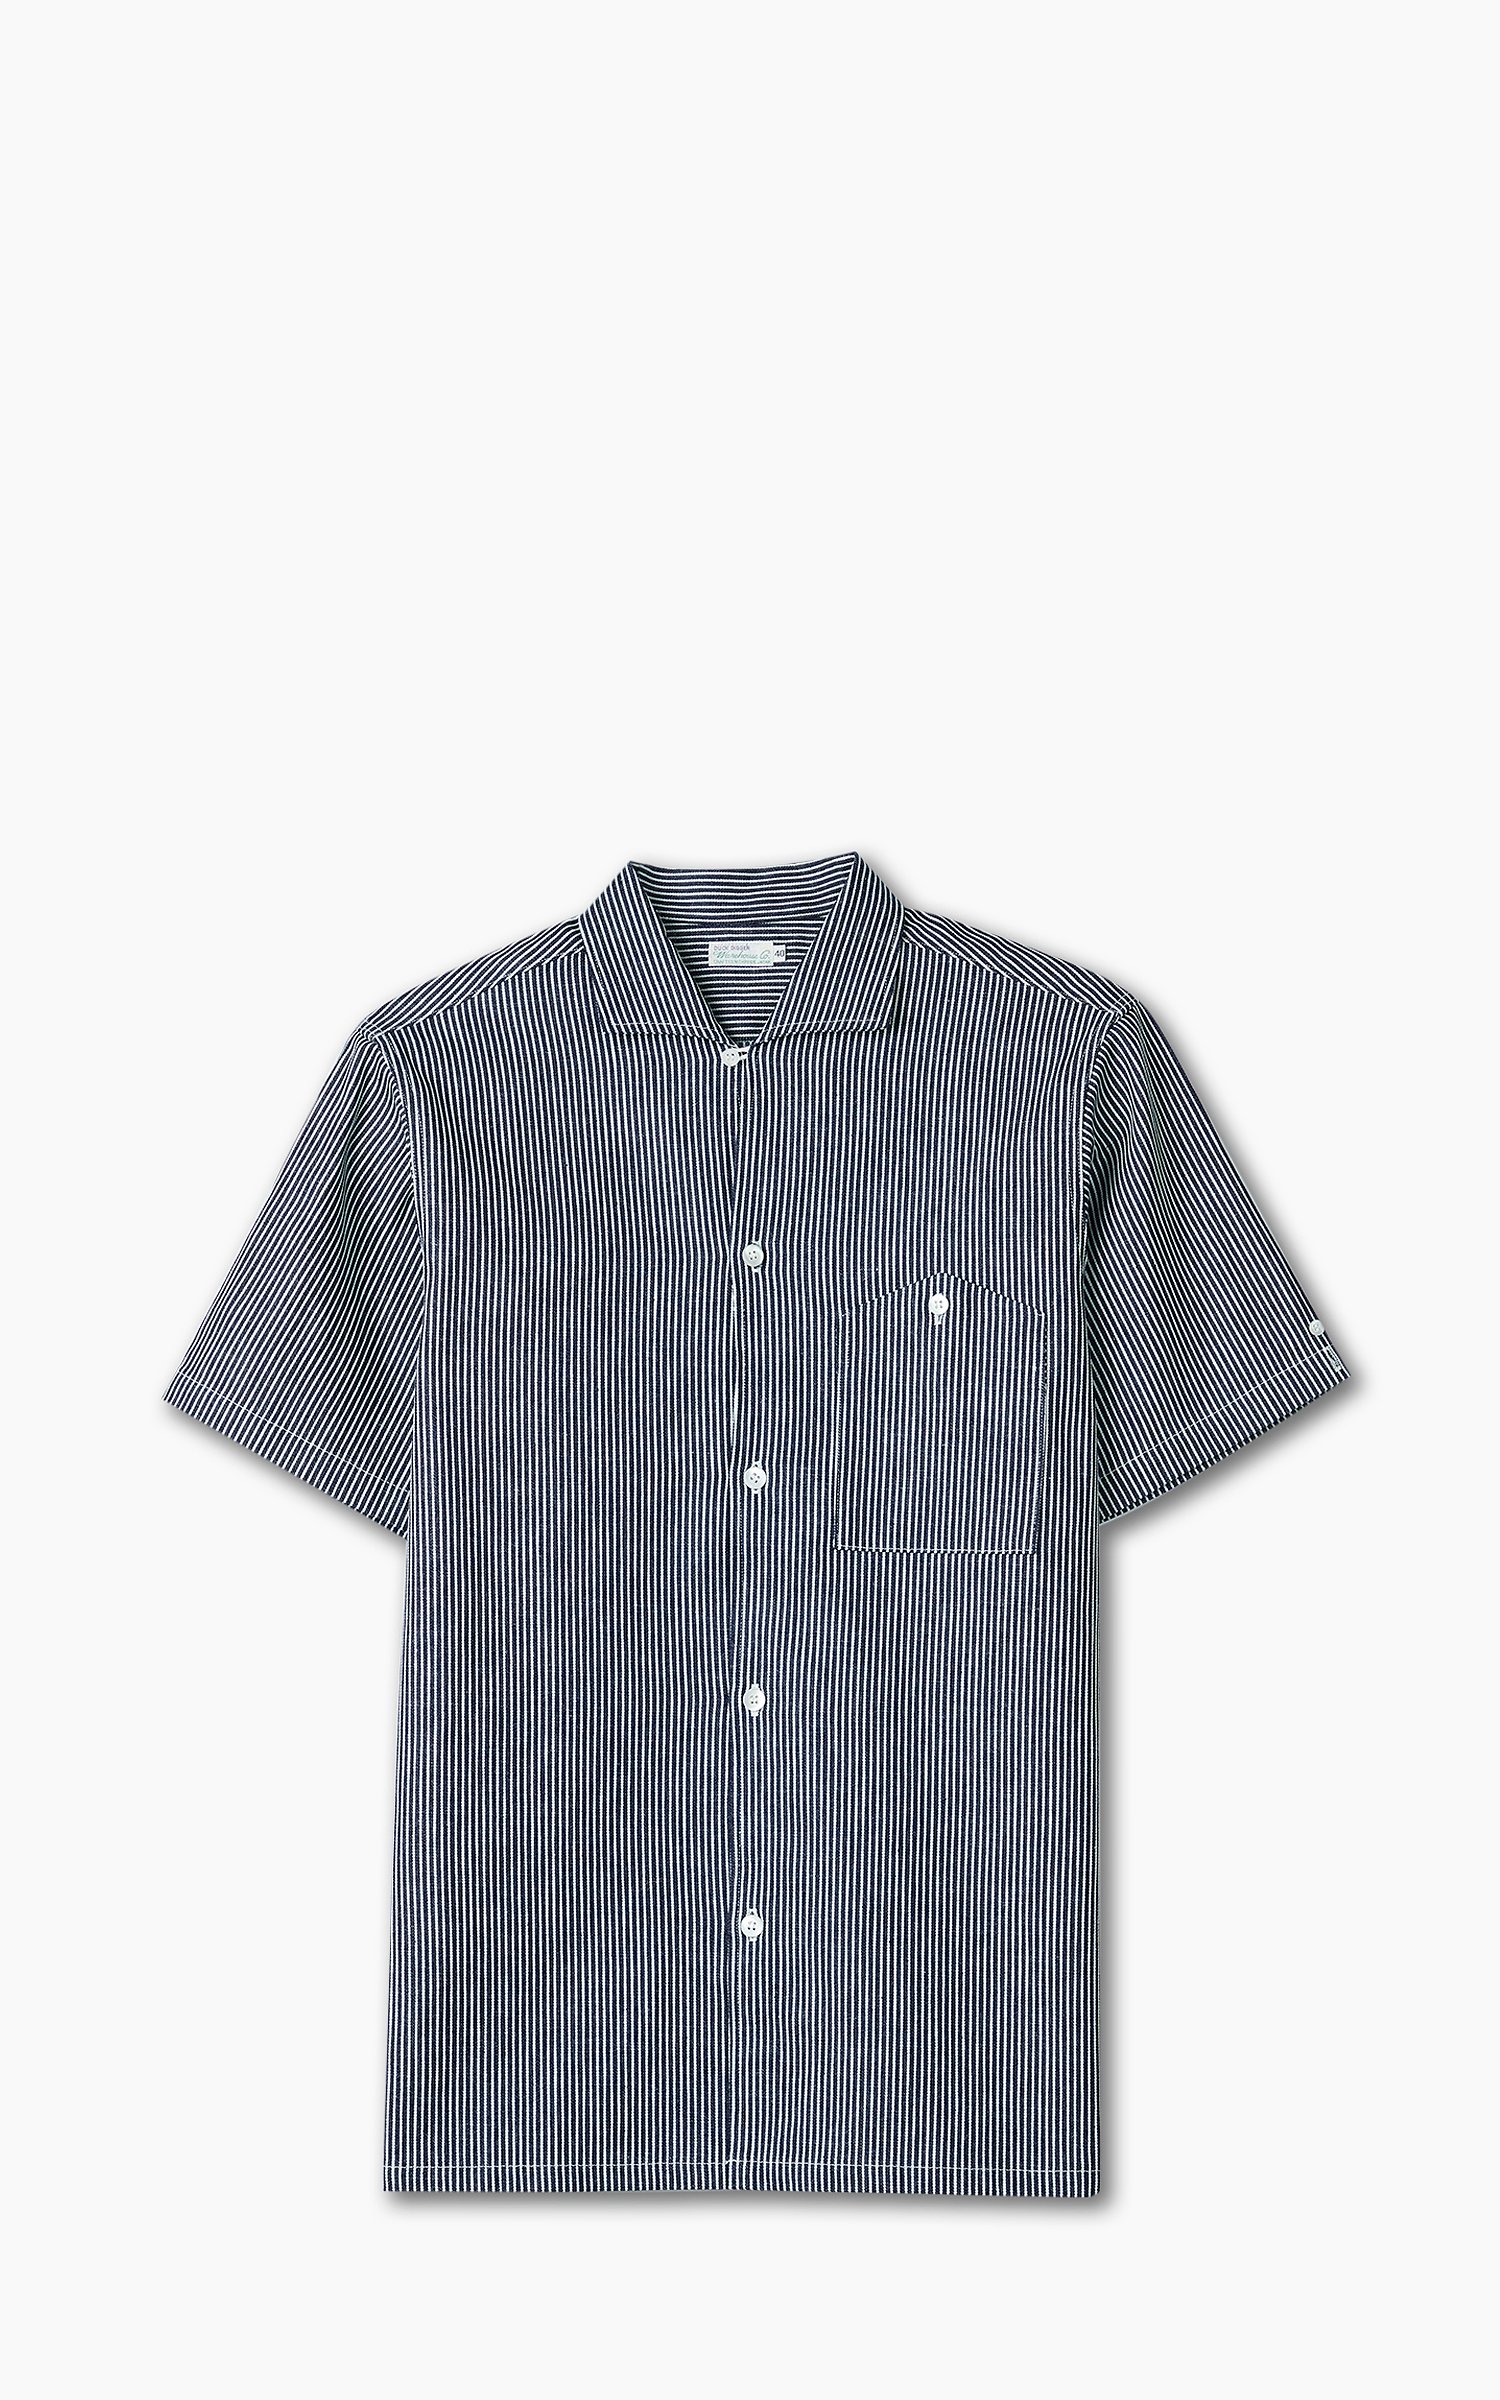 Warehouse & Co. Lot 3091 S/S Open Collar Shirt Hickory Stripe | Cultizm